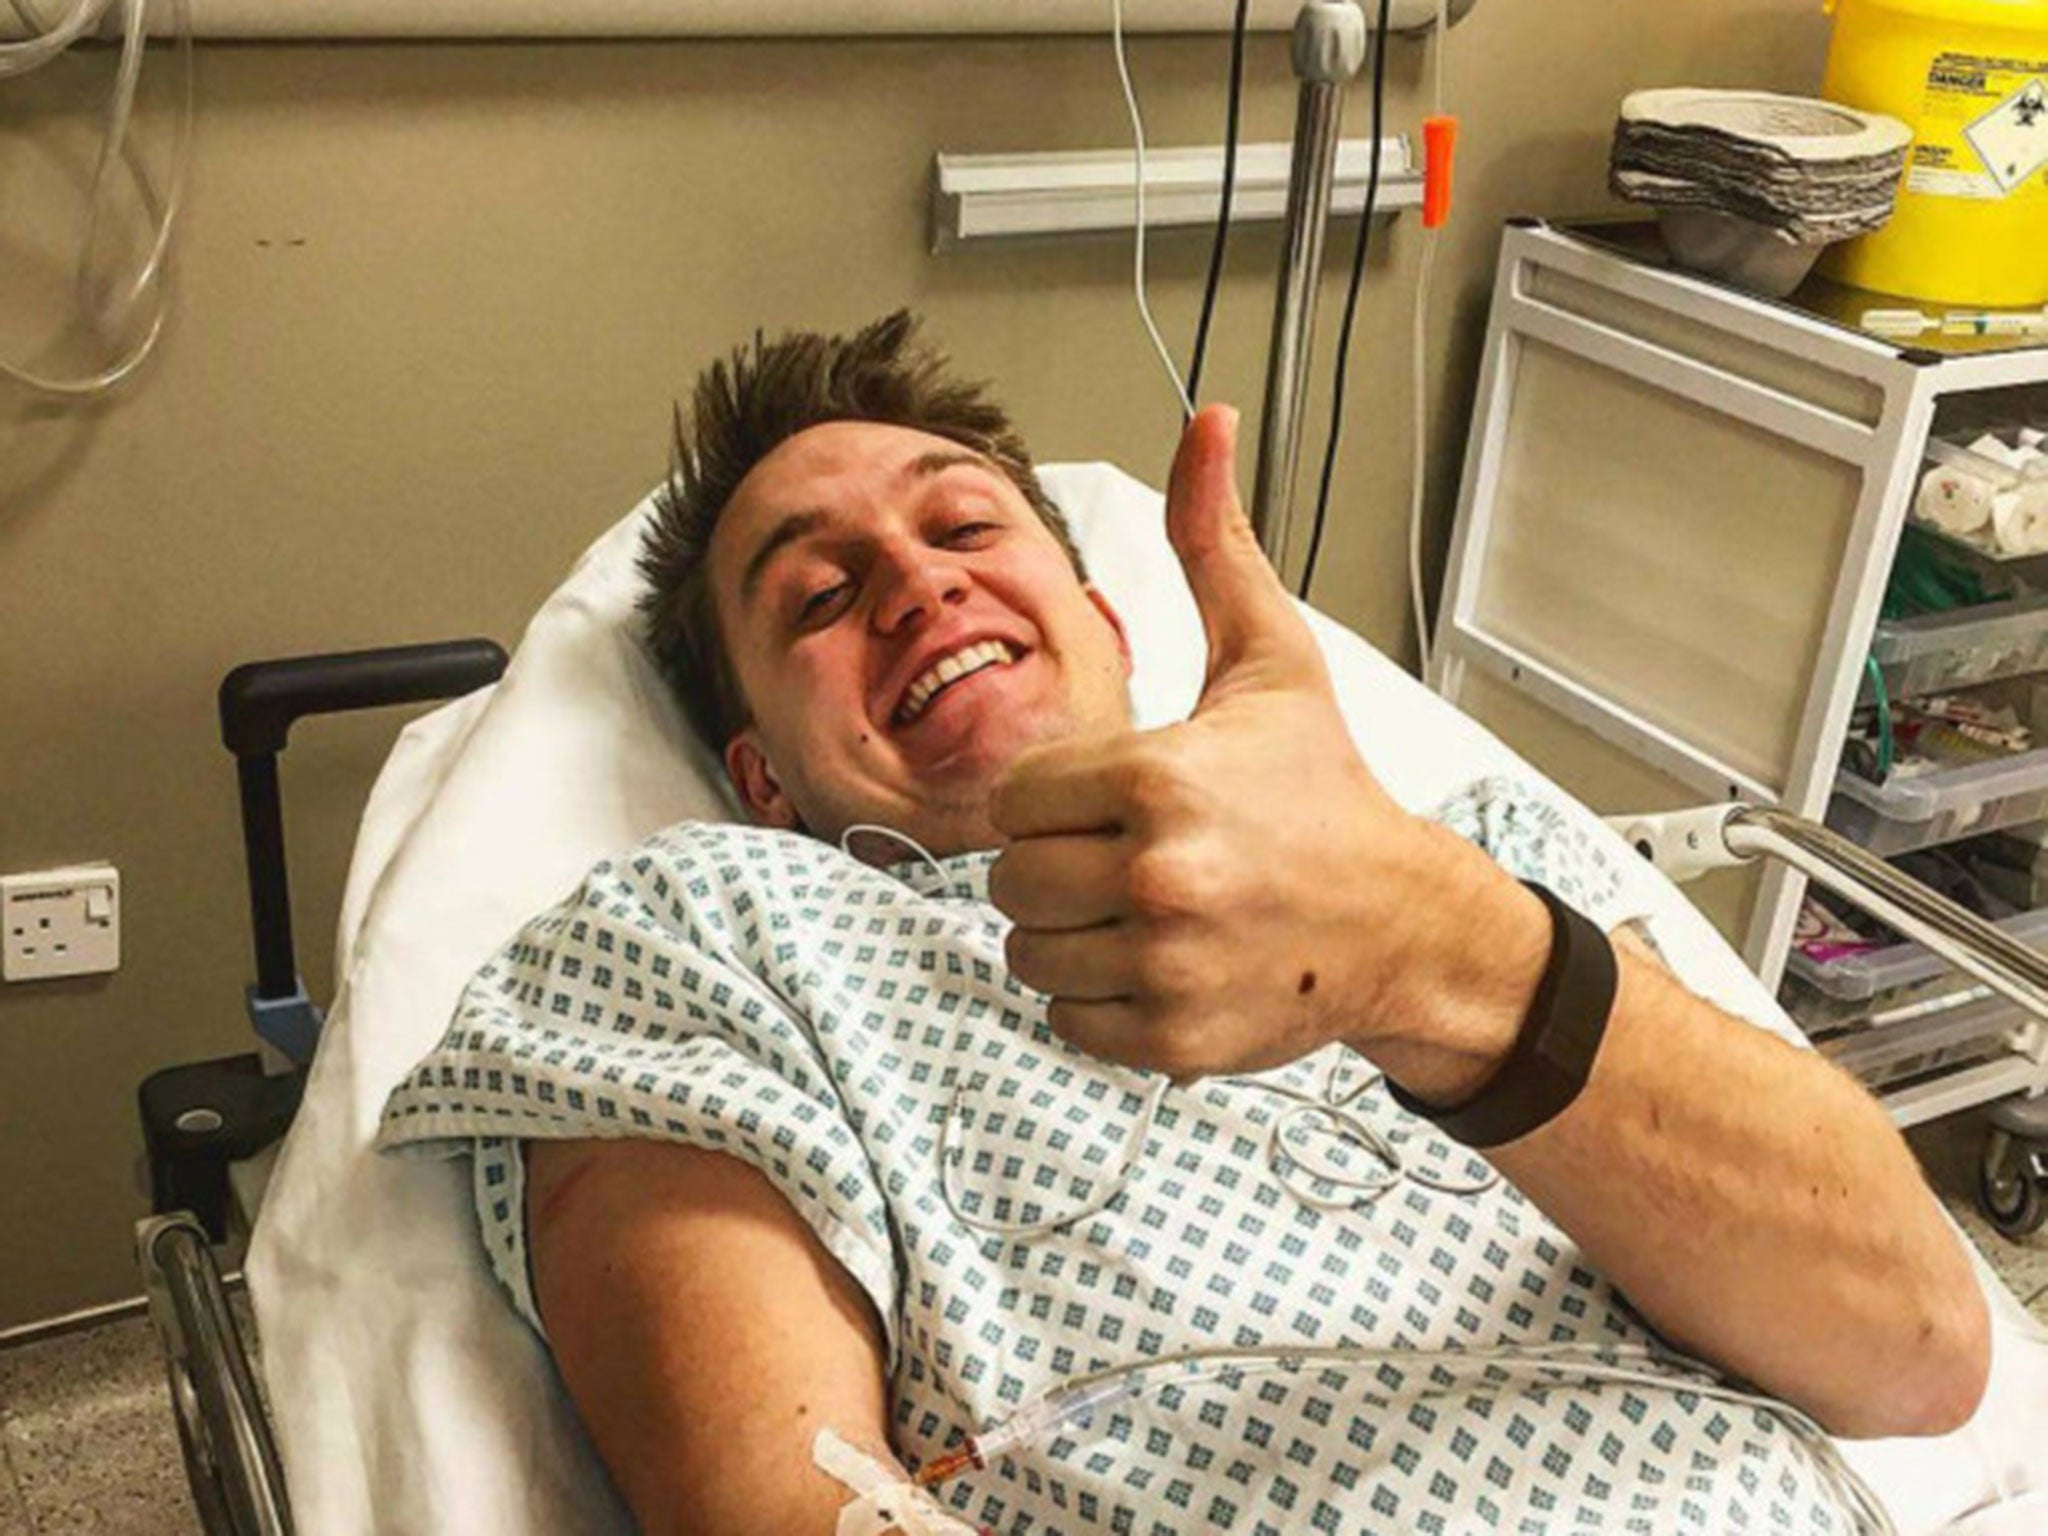 Arsenal fan Scott Woods posted a picture from his hospital bed